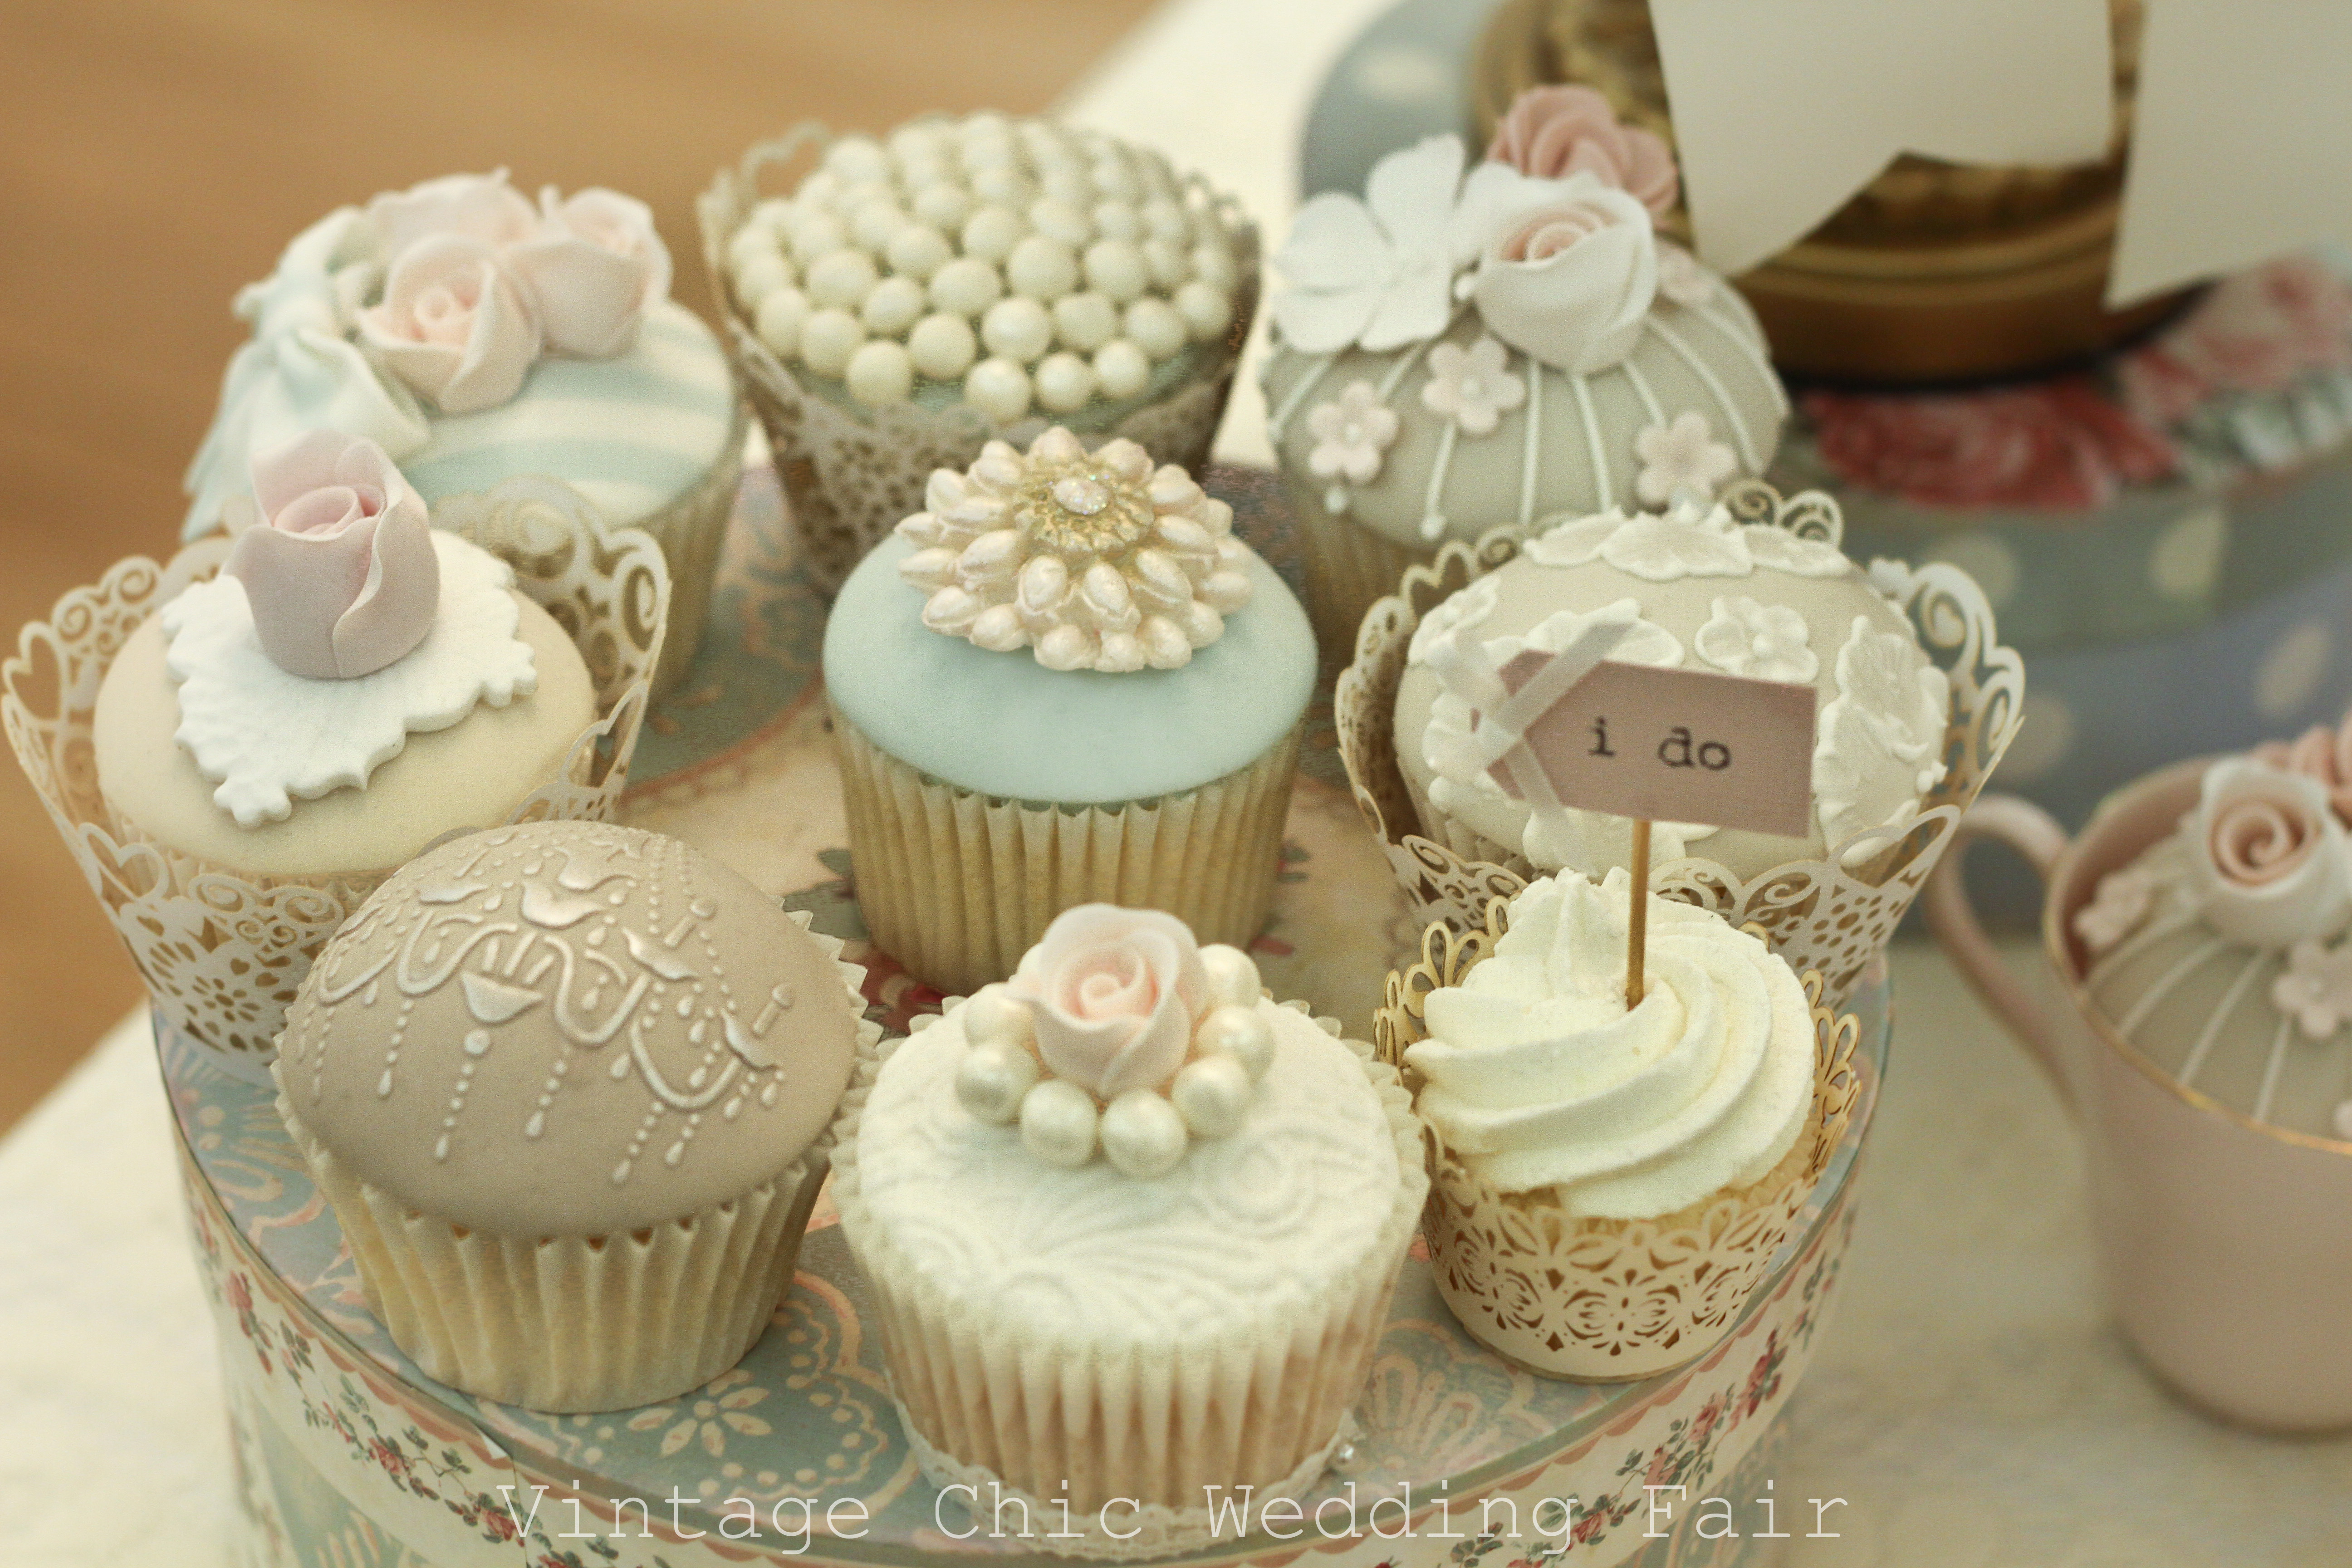 Wedding Cup Cakes Designs
 Vintage Chic Wedding Fair 22nd April part two